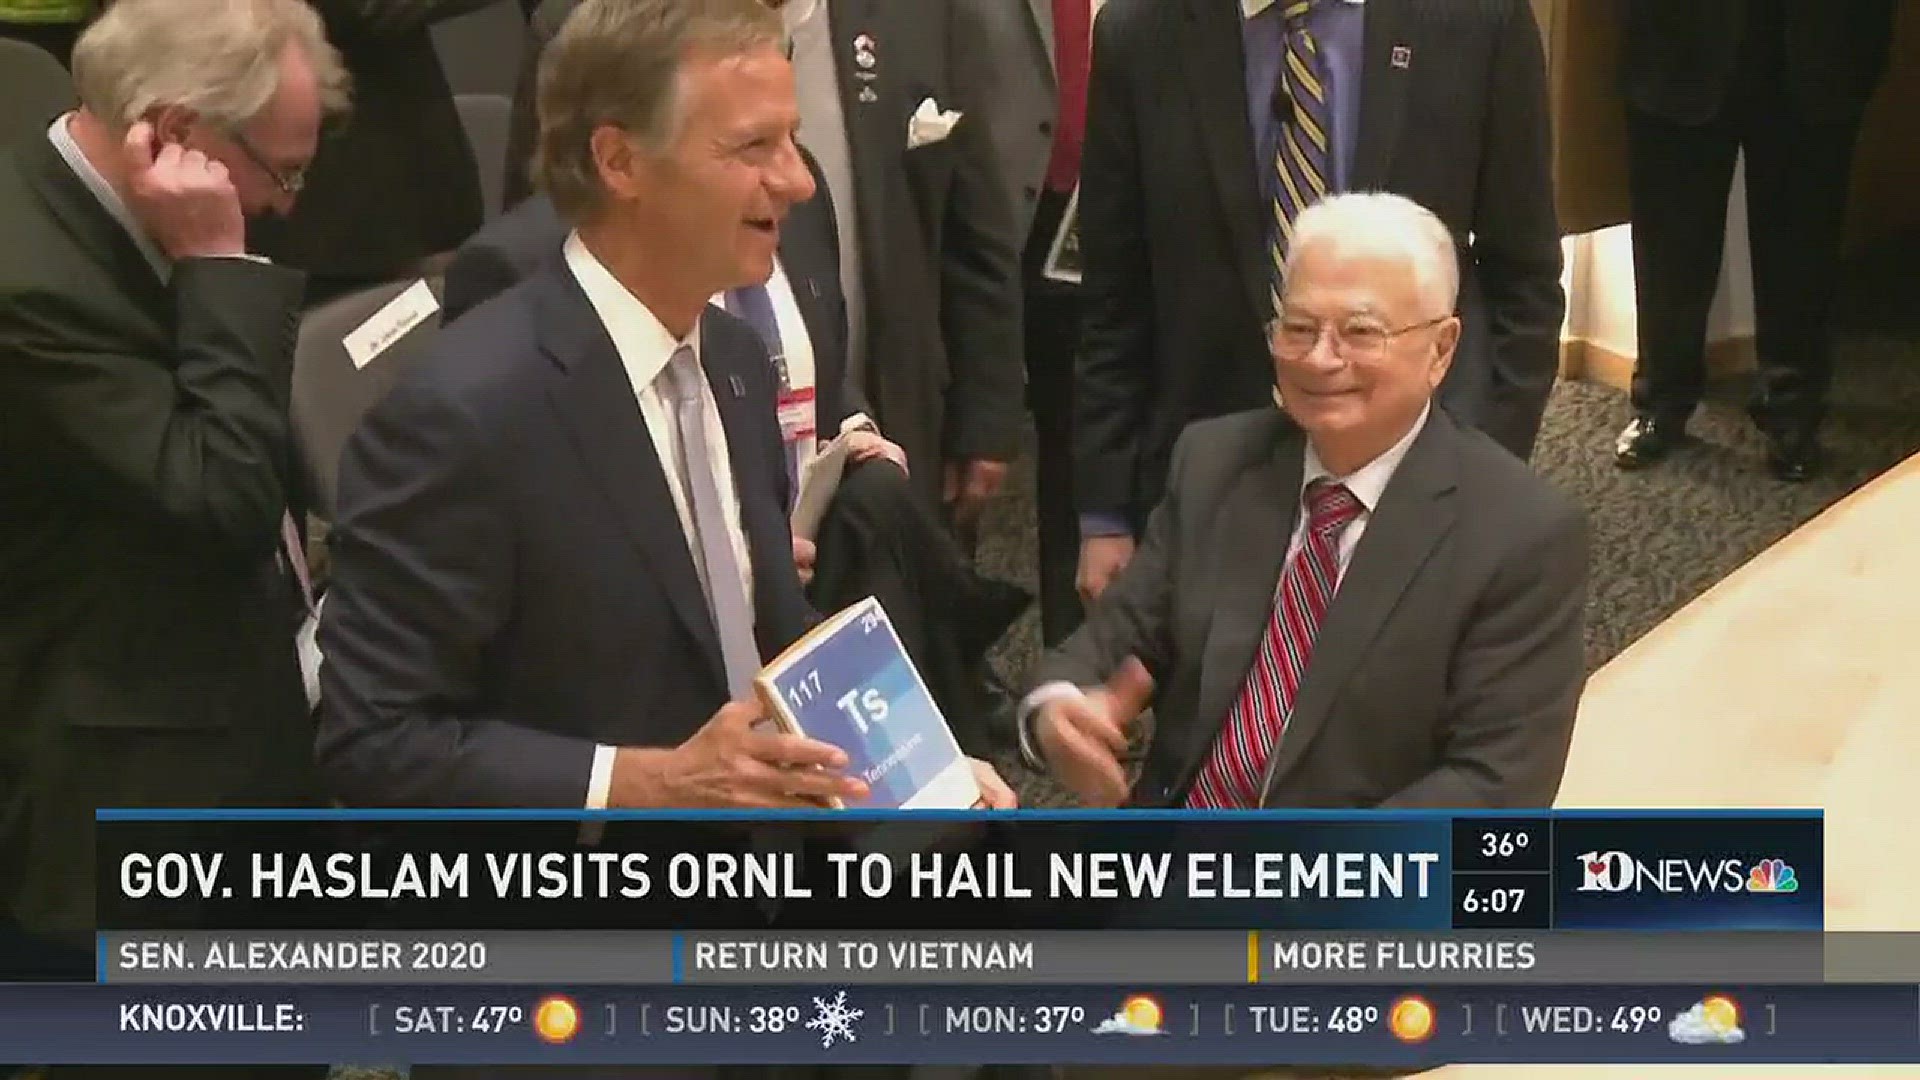 Jan. 27, 2017: Gov. Bill Haslam visited Oak Ridge National Laboratory to congratulate a group of scientists who discovered a the new element Tennessine.